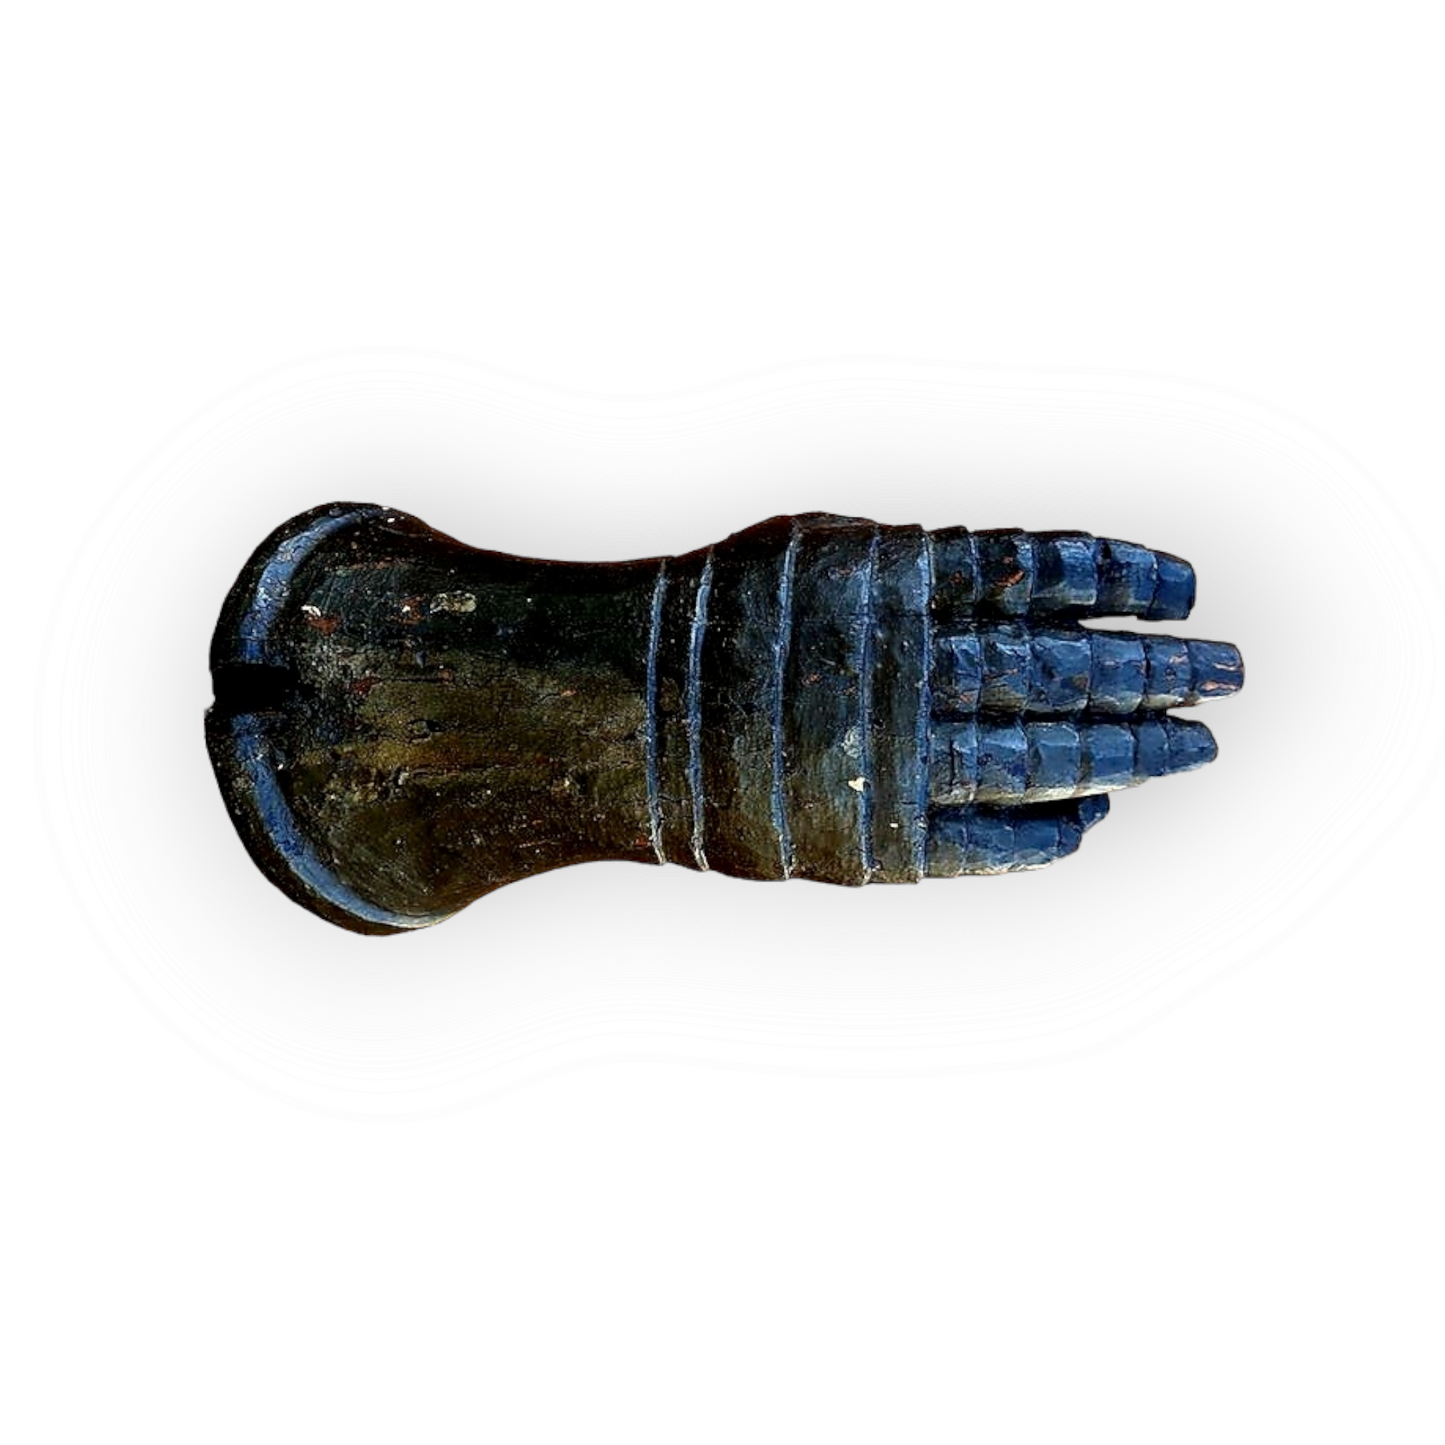 A Rare Life-Size Early 17th Century Antique Carved Wood Sculpture of an Armoured Glove or Gauntlet